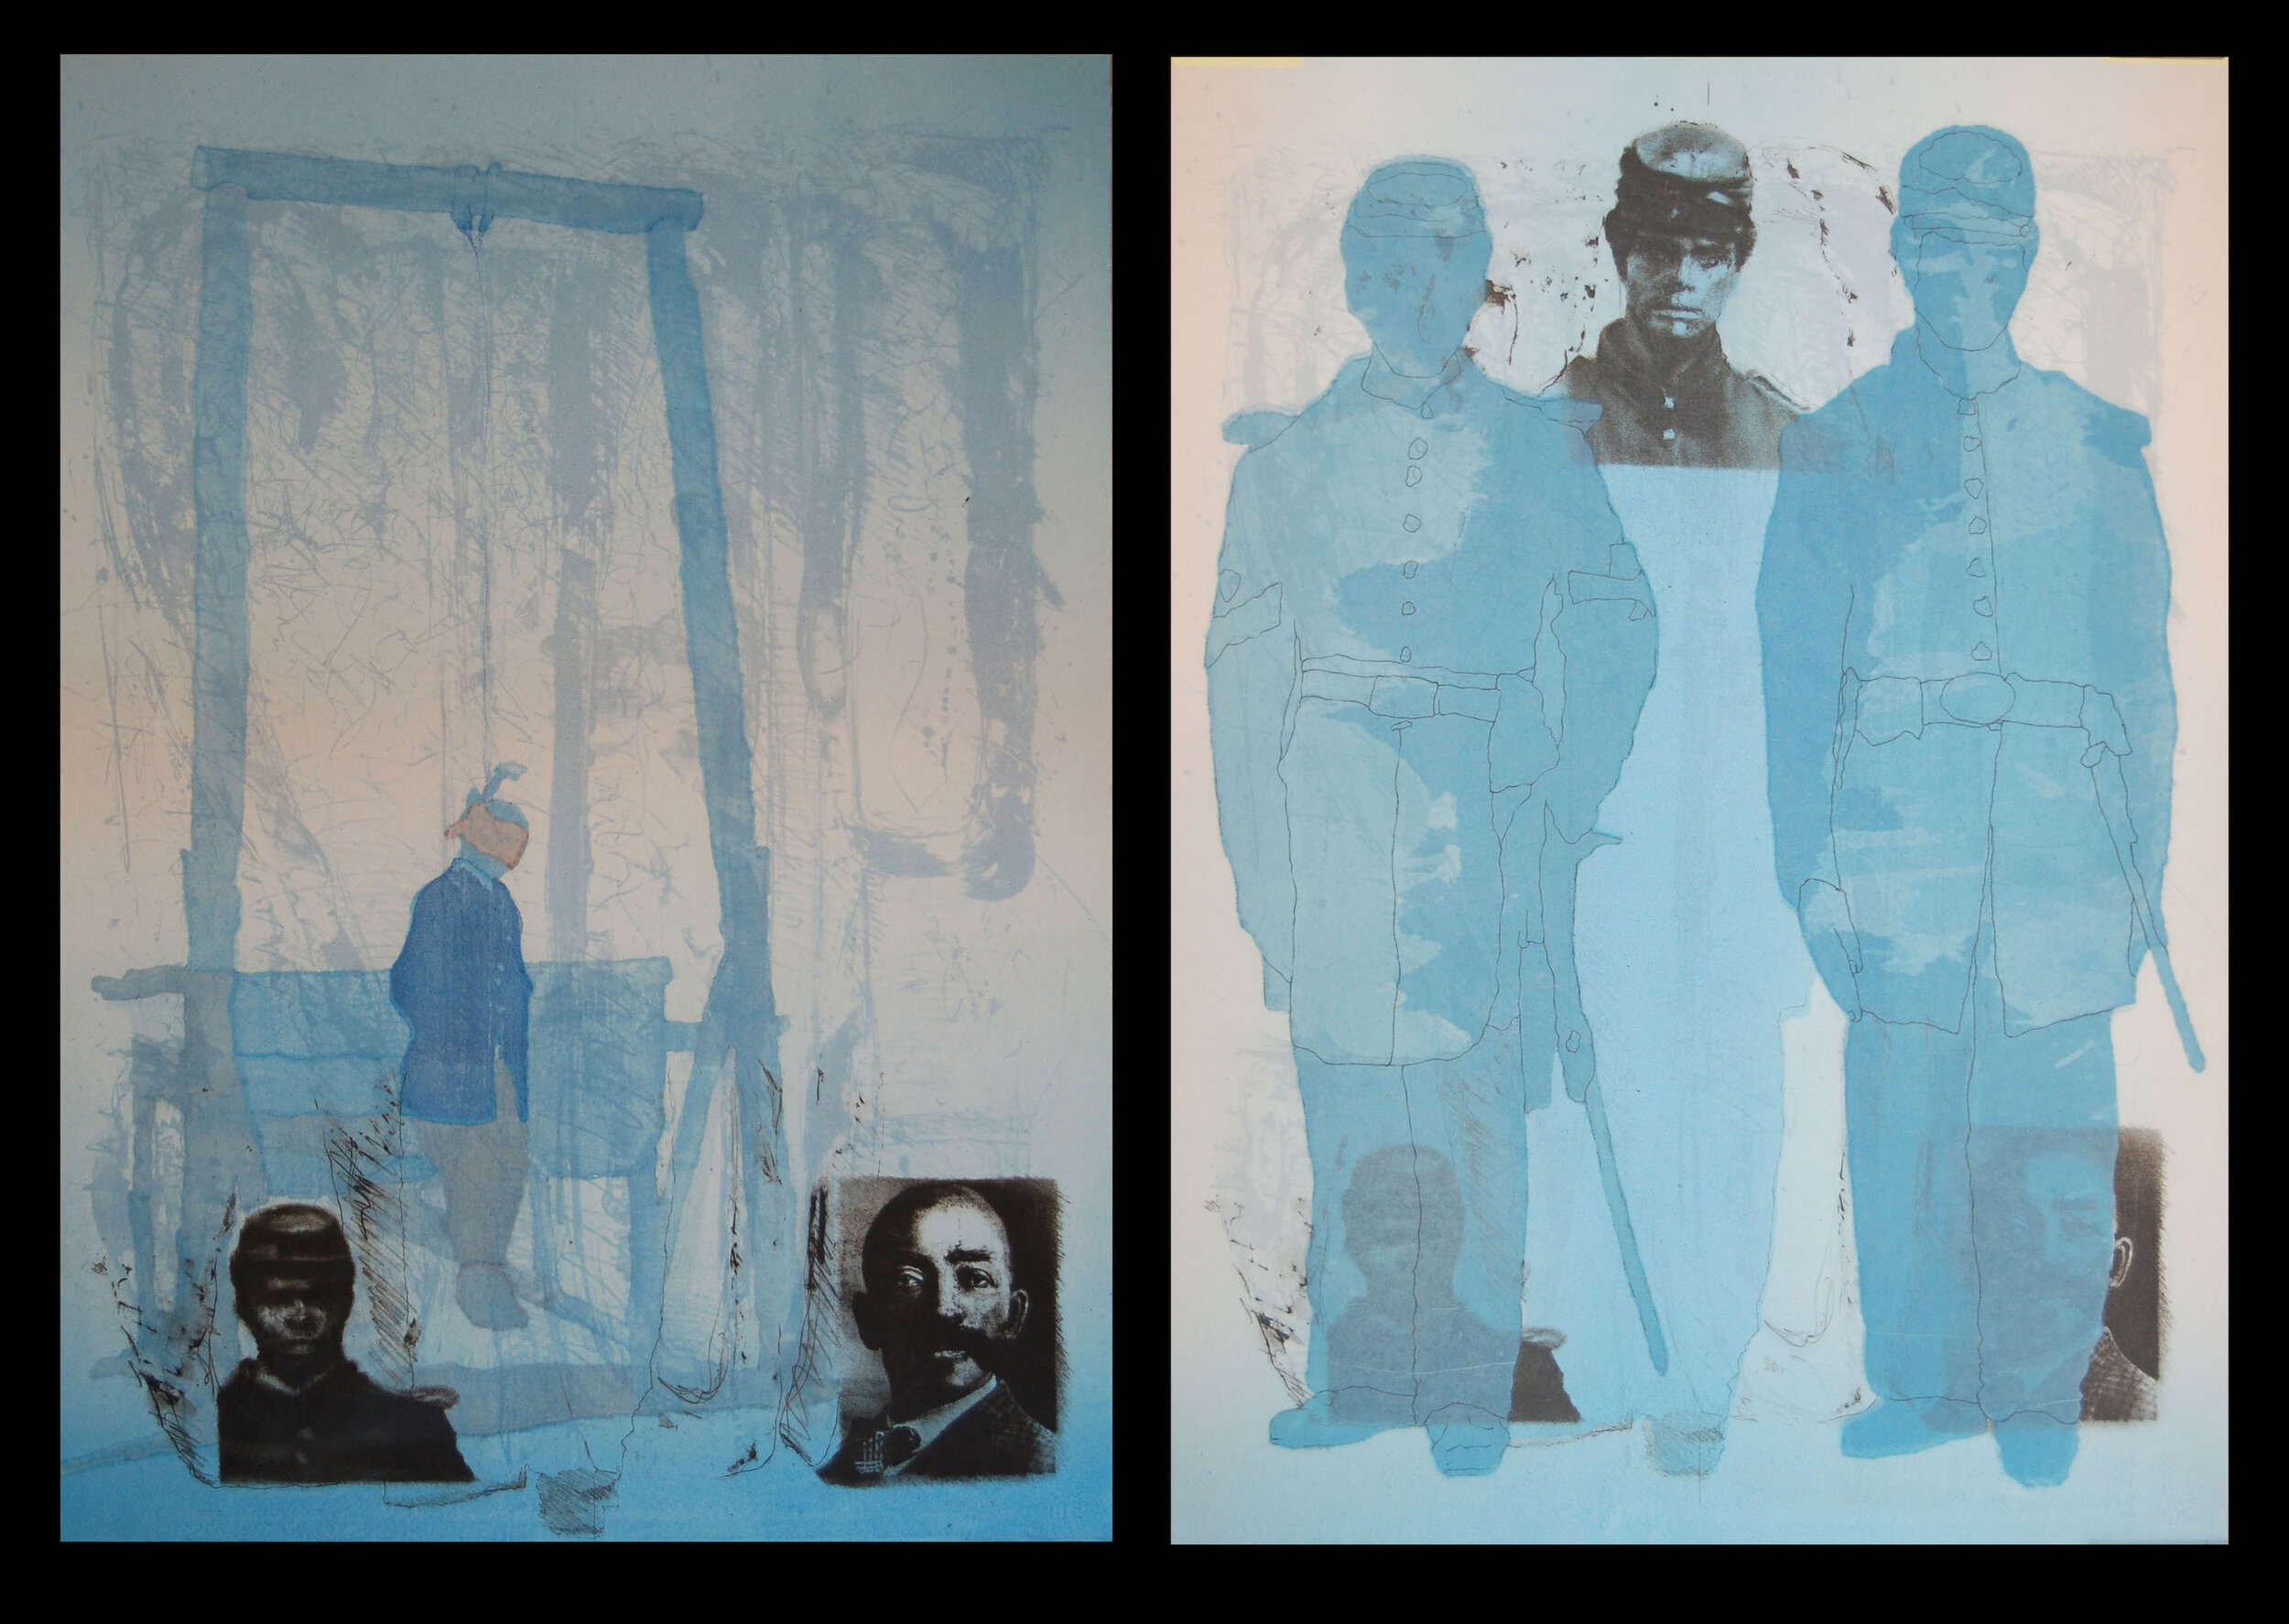    The Uncivil War  , lithograph mixed-media diptych, 46” x 36” (each panel) 